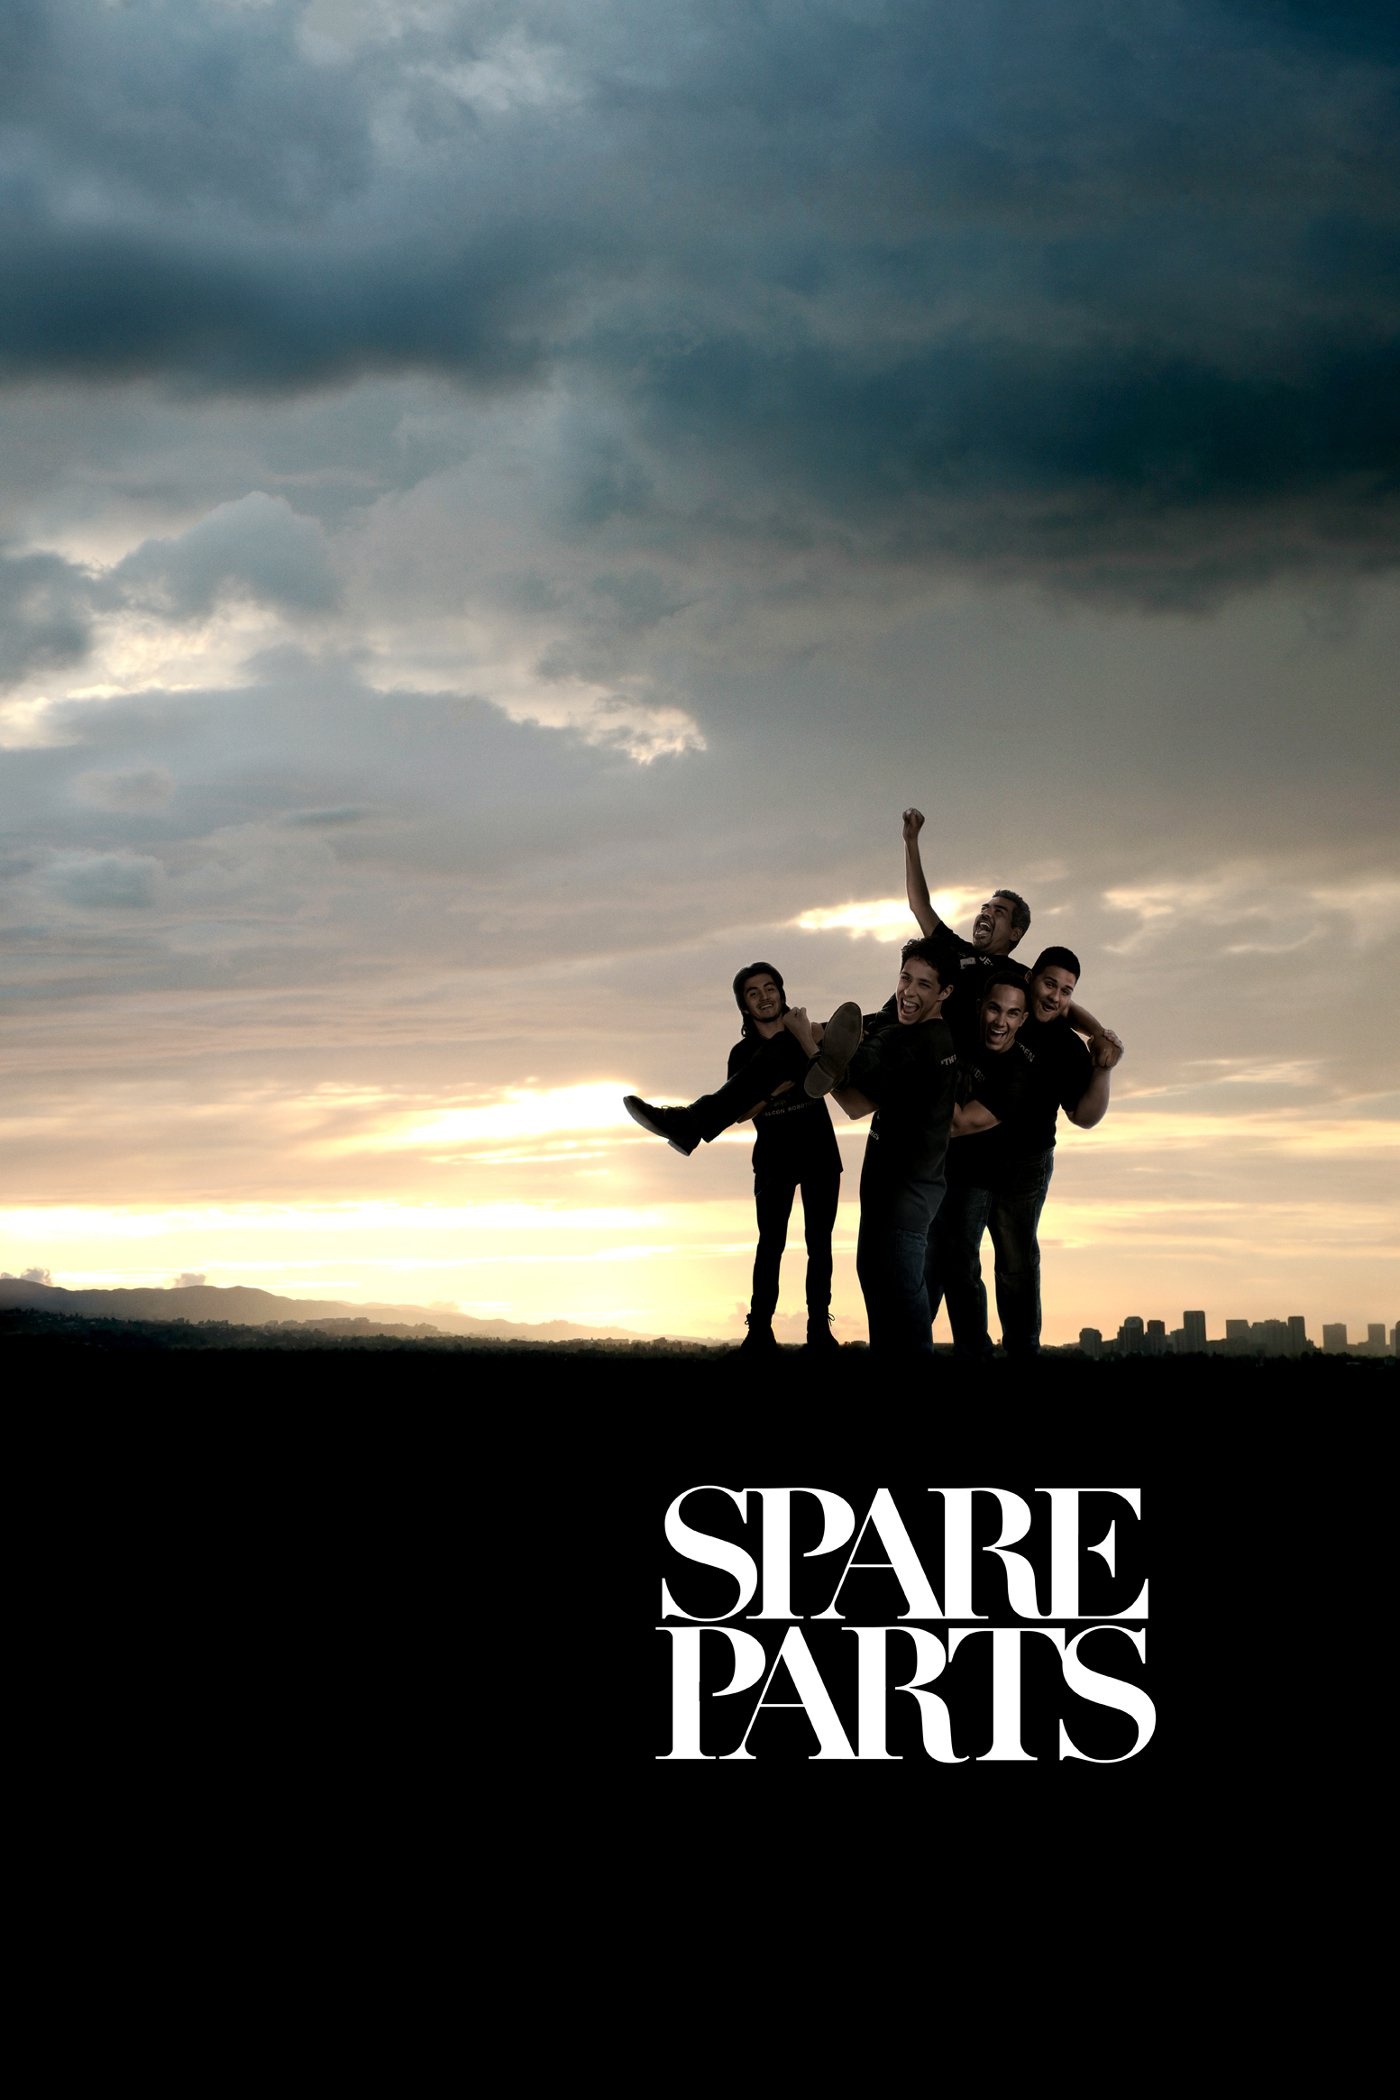 Spare Parts movie, Thought-provoking quotes, Inspirational story, Overcoming challenges, 1400x2100 HD Handy